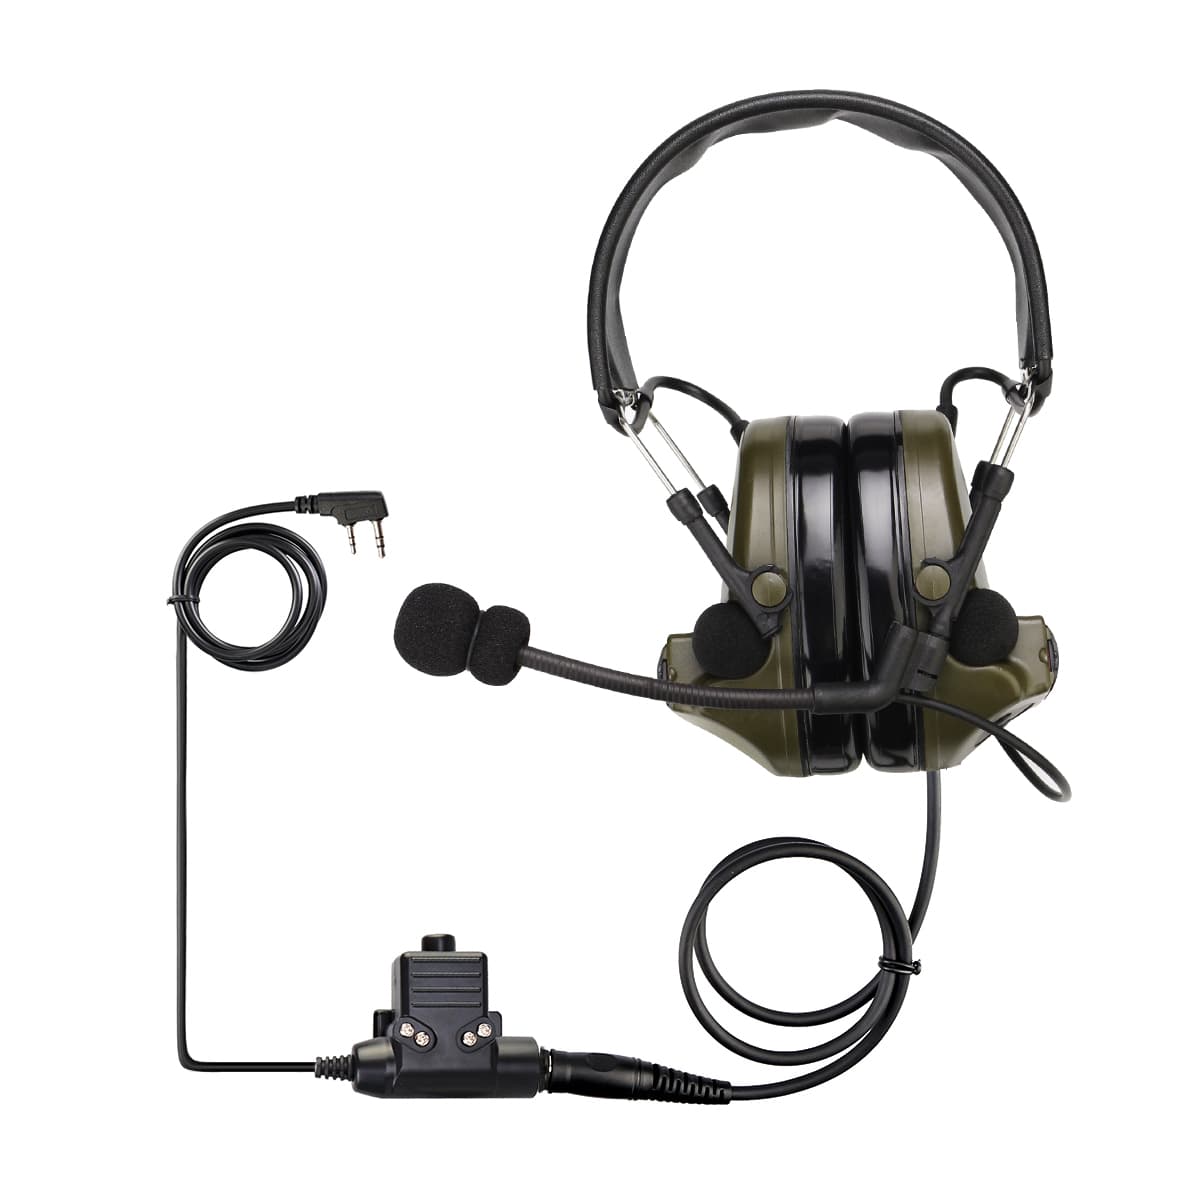 Retevis EHK007 Tactical Electronic Hearing Protector Headset